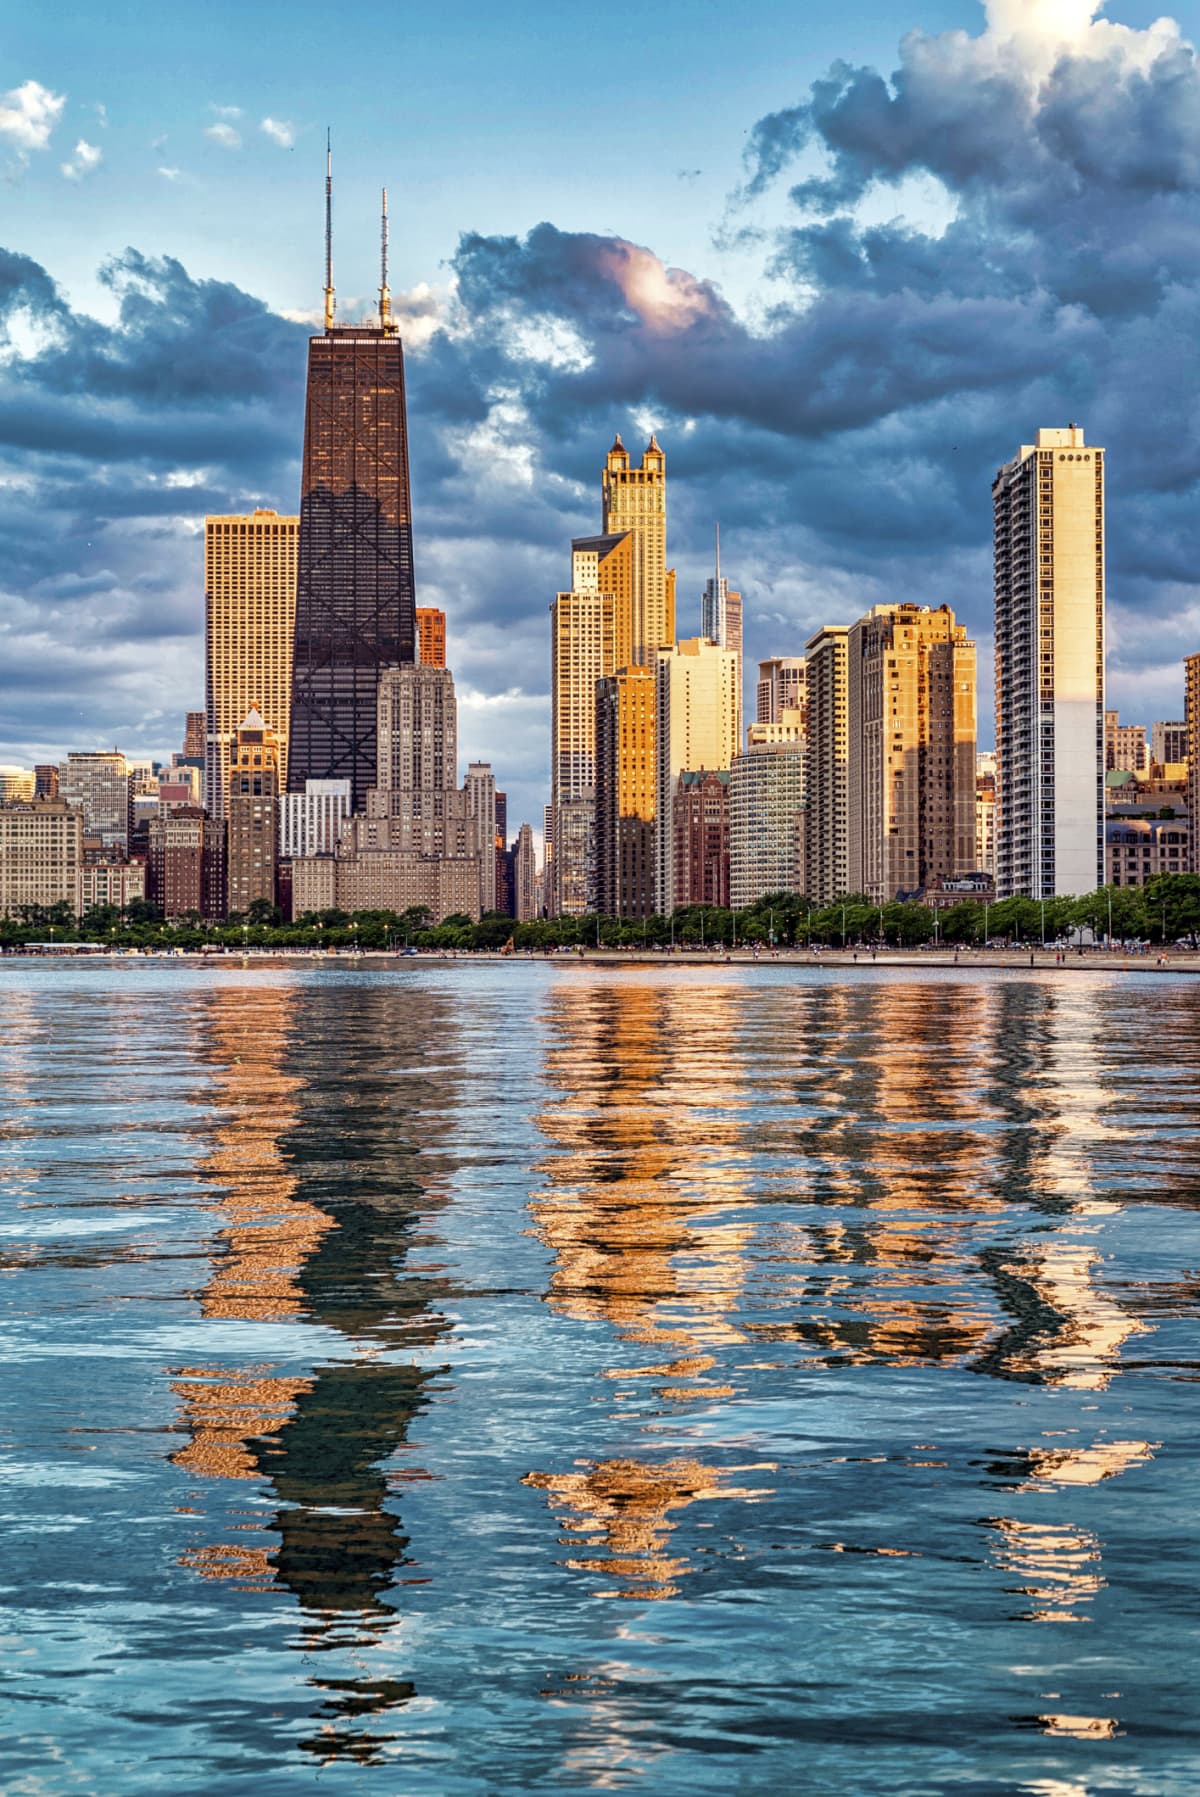 Chicago's skyline bathed in pink sunlight and reflected on the water at sunset